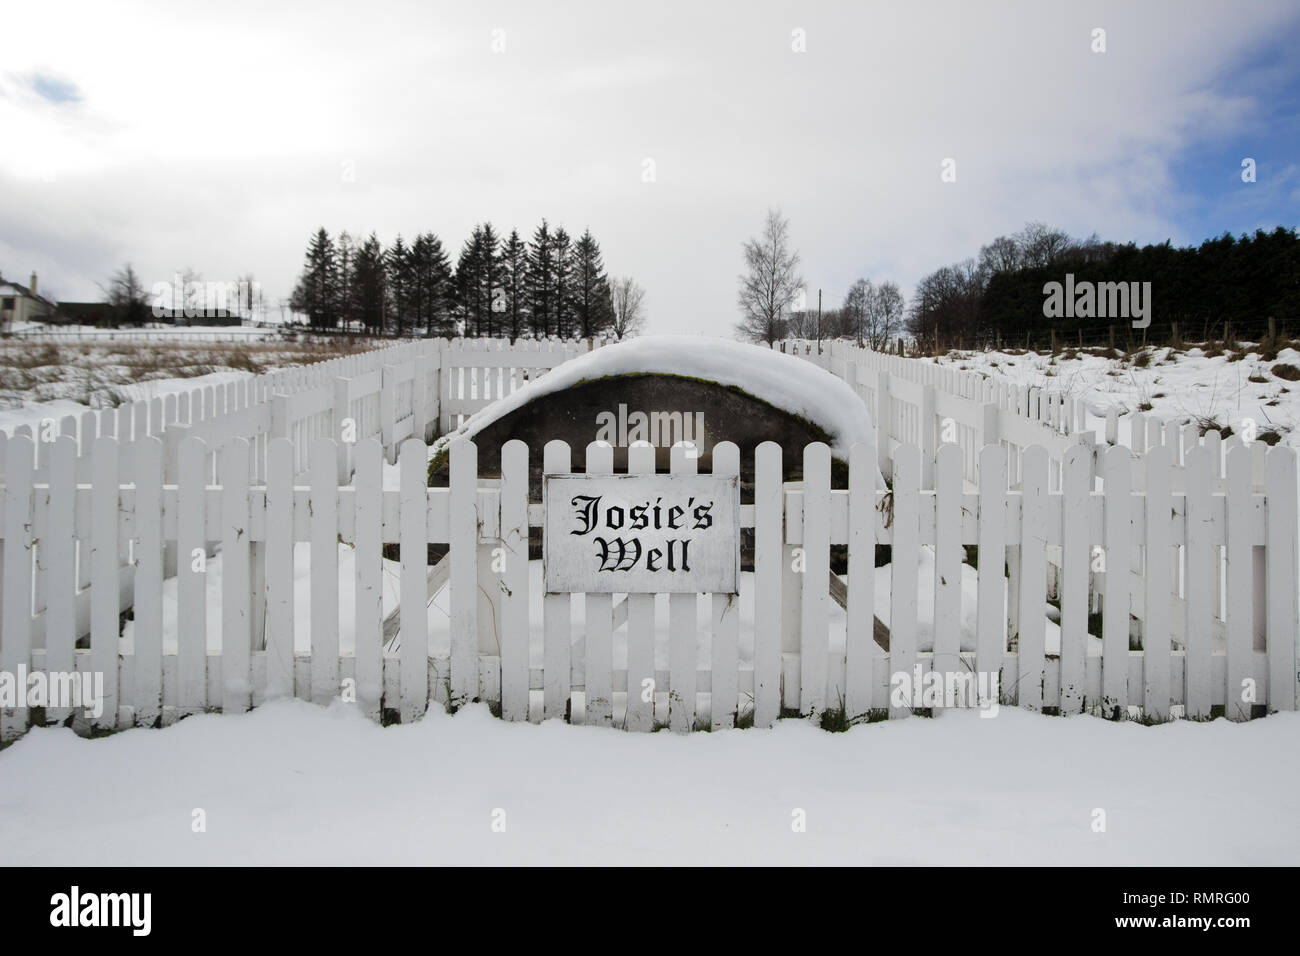 Josie's Well from where the water for The Glenlivet Distillery comes covered in snow Stock Photo